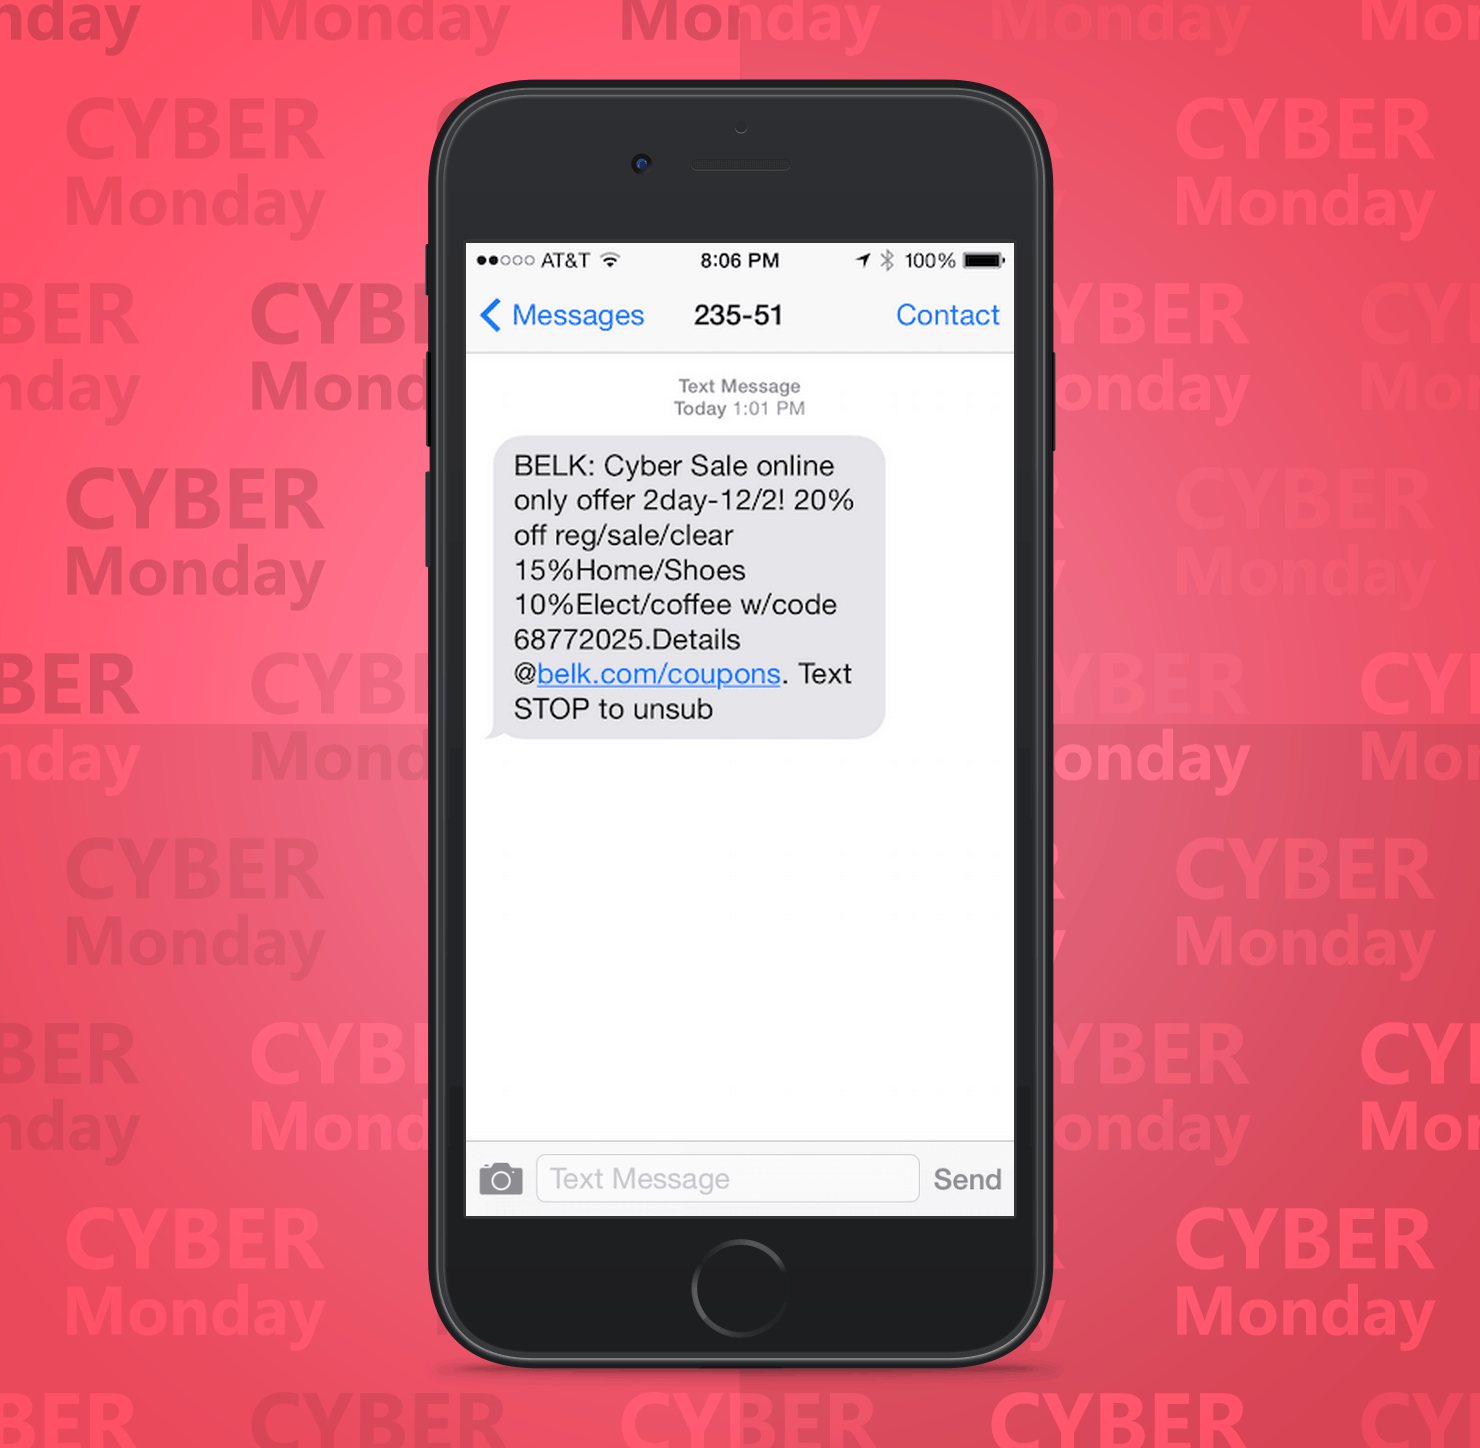 SMS Coupon Example Sent on Cyber Monday From Belk Retail Stores to Customers